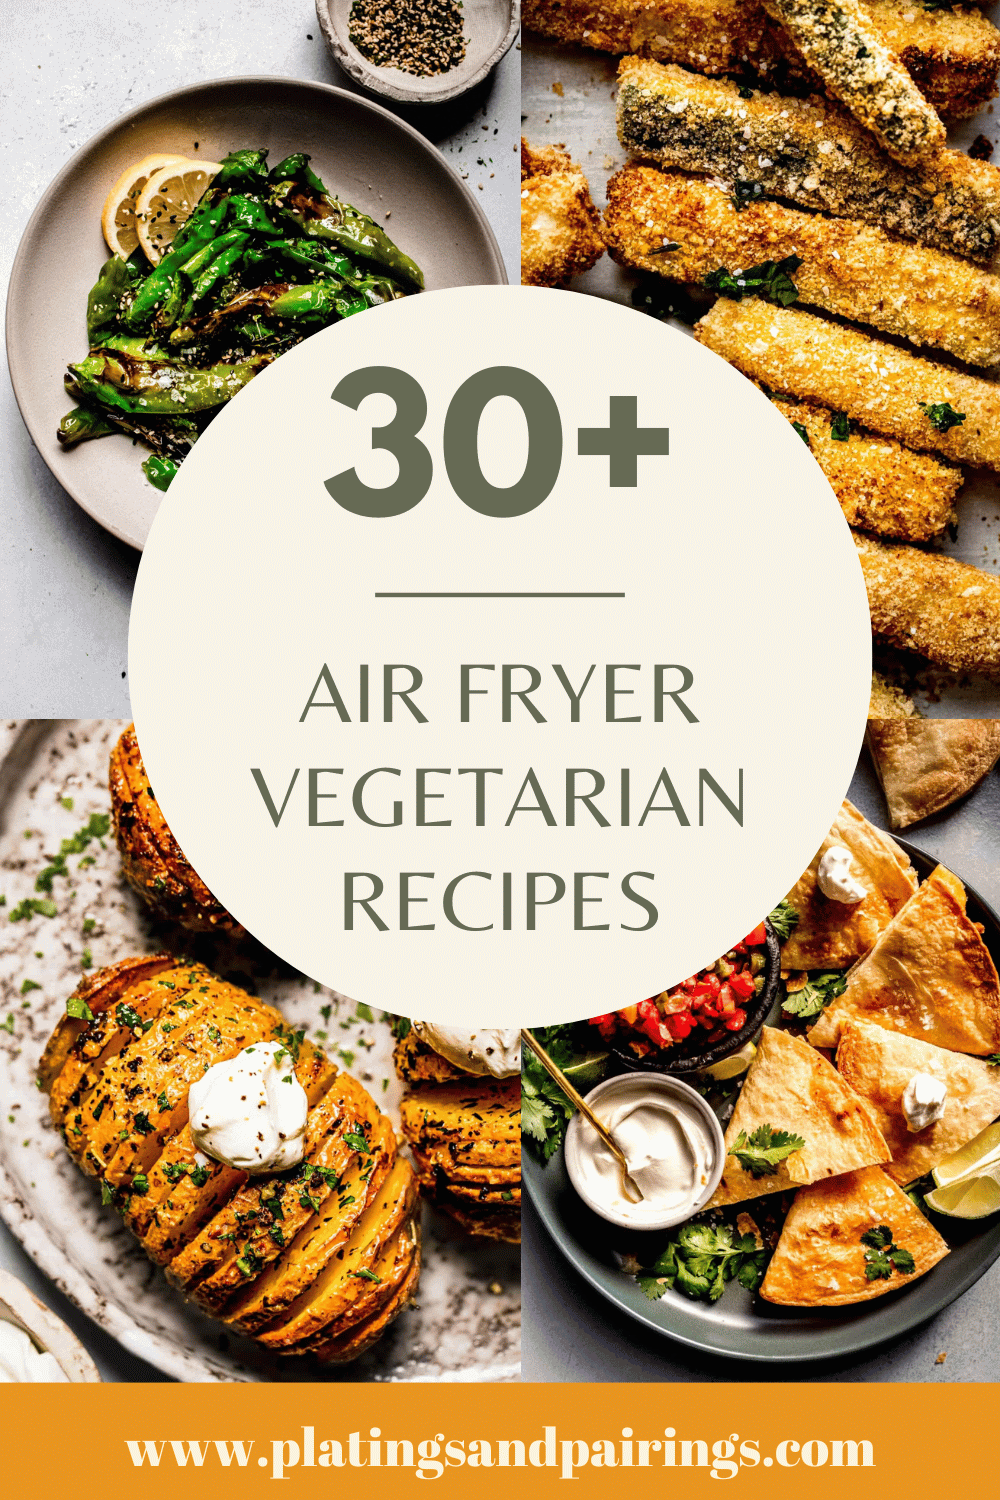 Collage of vegetarian air fryer recipes with text overlay.